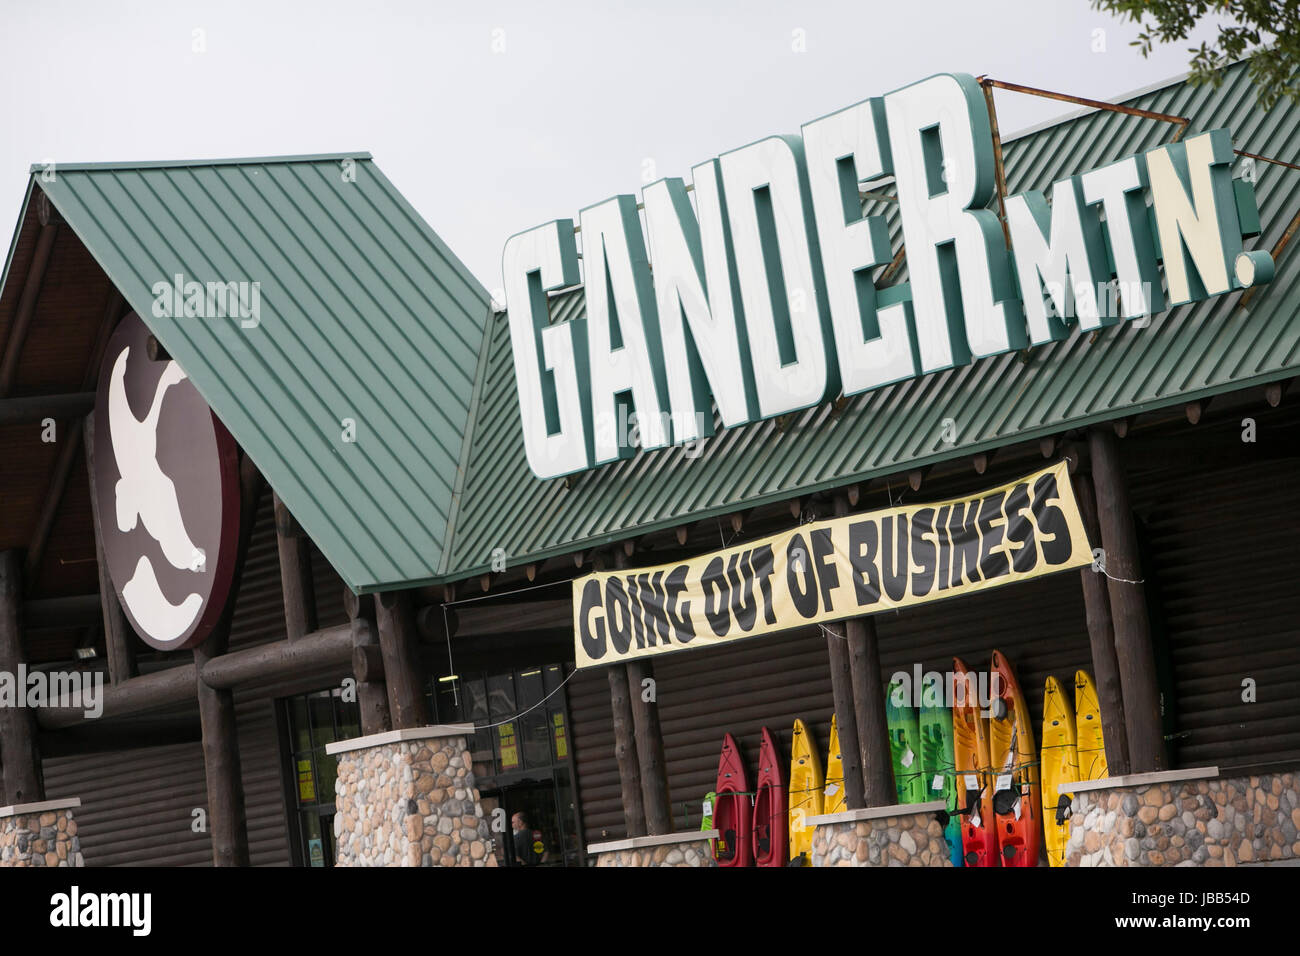 A 'Going Out Of Business' banner at a Gander Mountain retail store in Houston, Texas, on May 28, 2017. Stock Photo